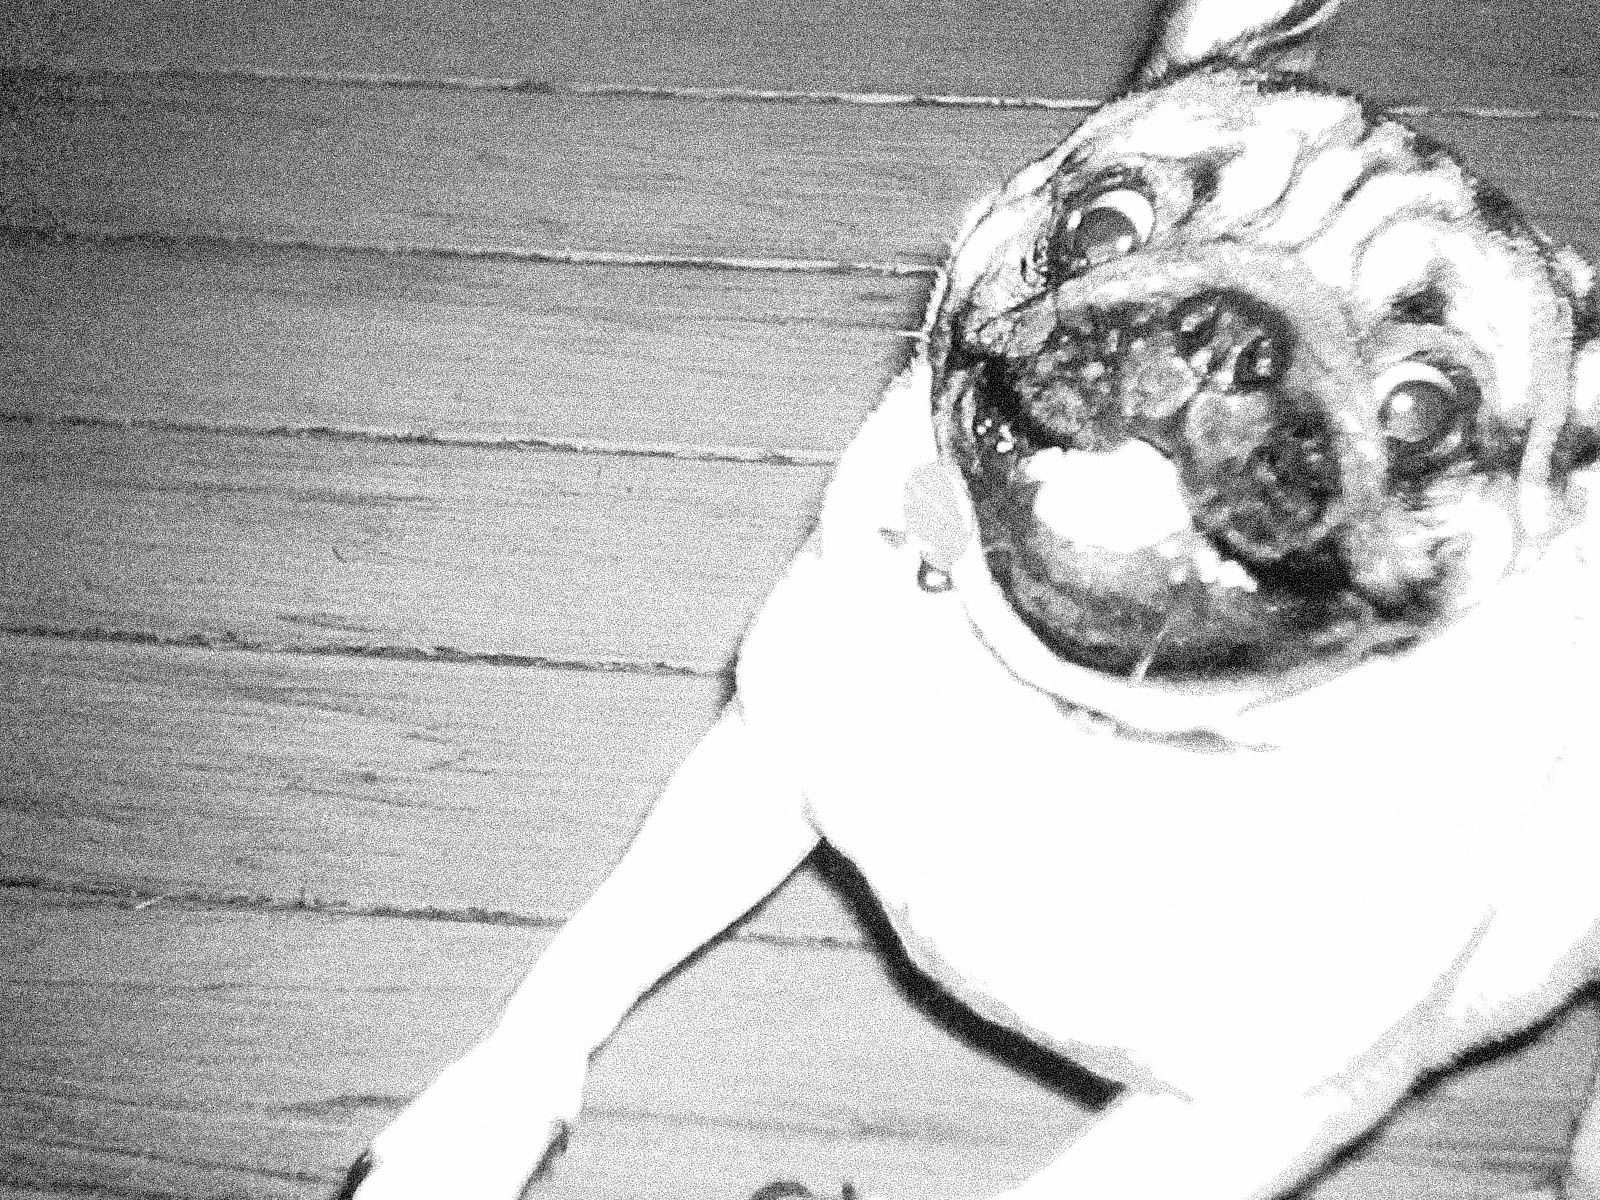 A grainy black-and-white close-up of a pug dog with a playful expression on a wooden floor.